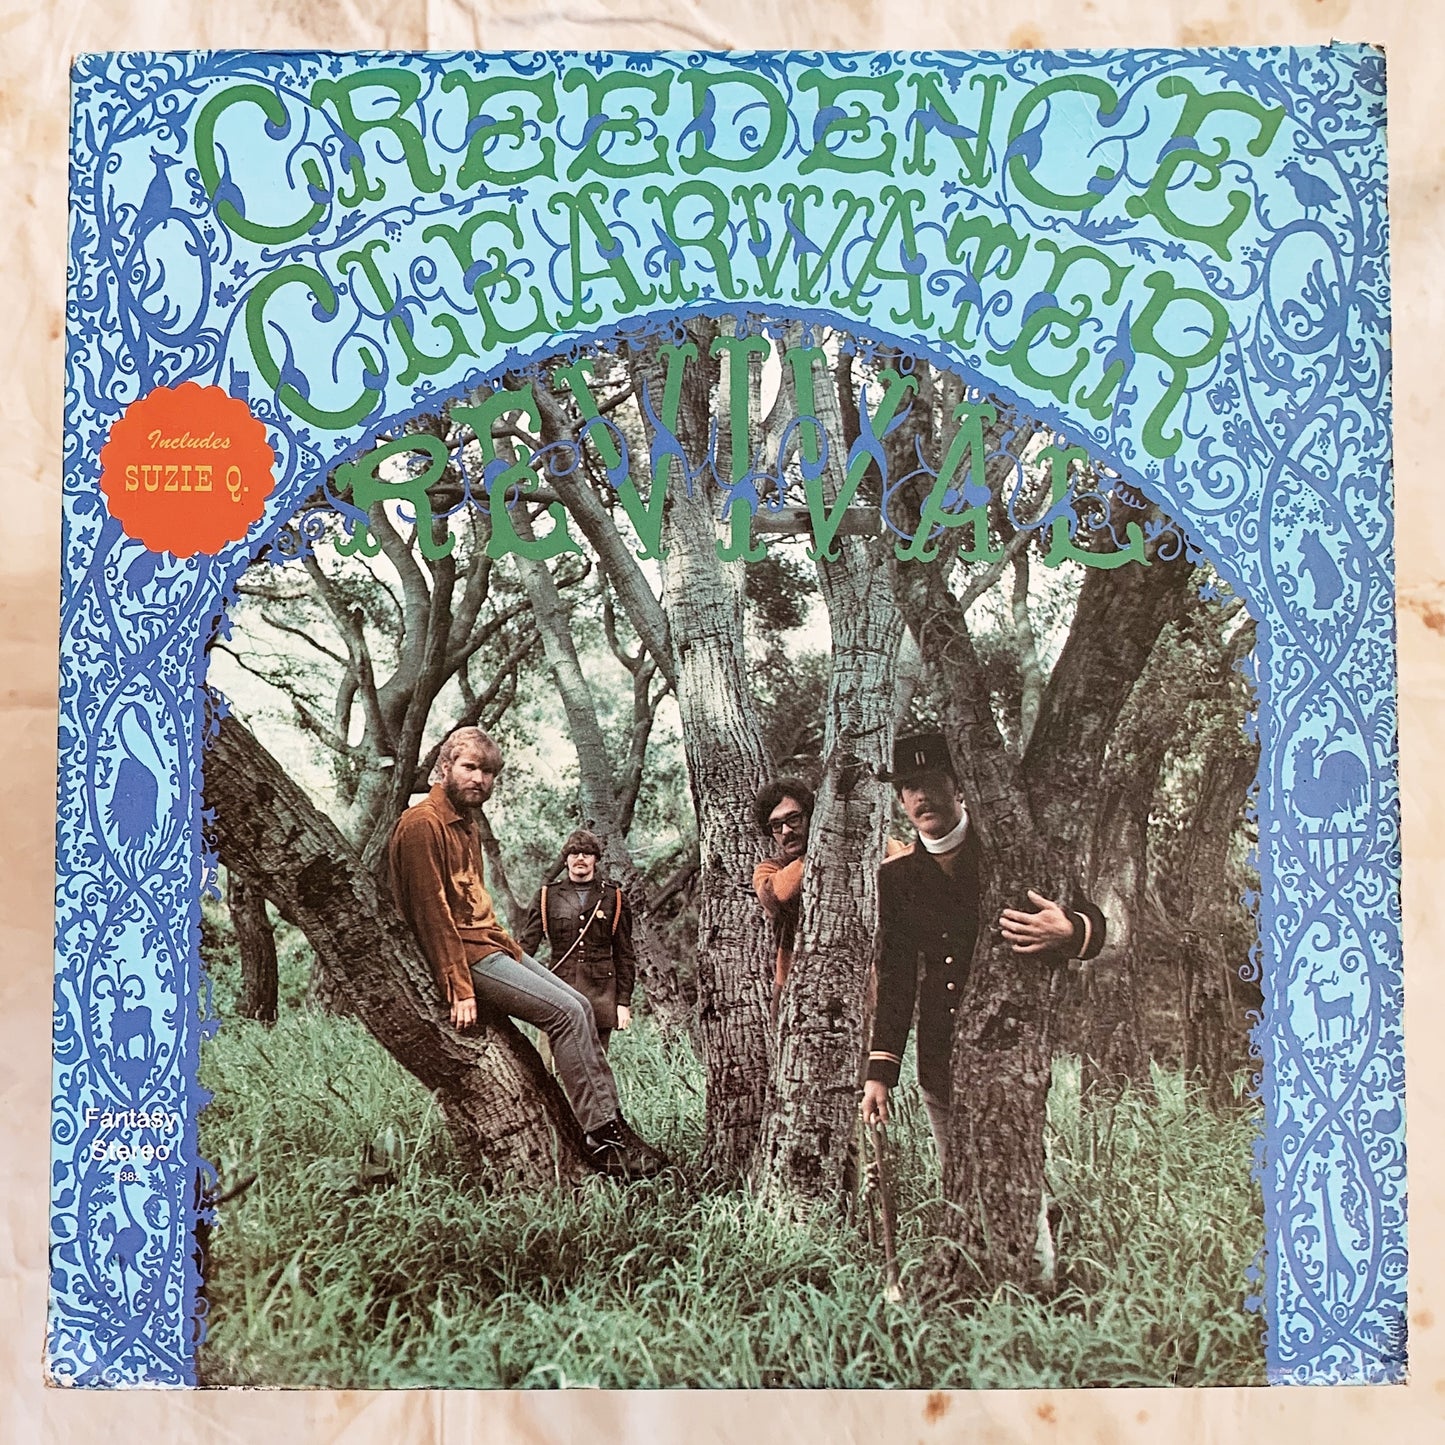 Creedence Clearwater Revival / Creedence Clearwater Revival LP